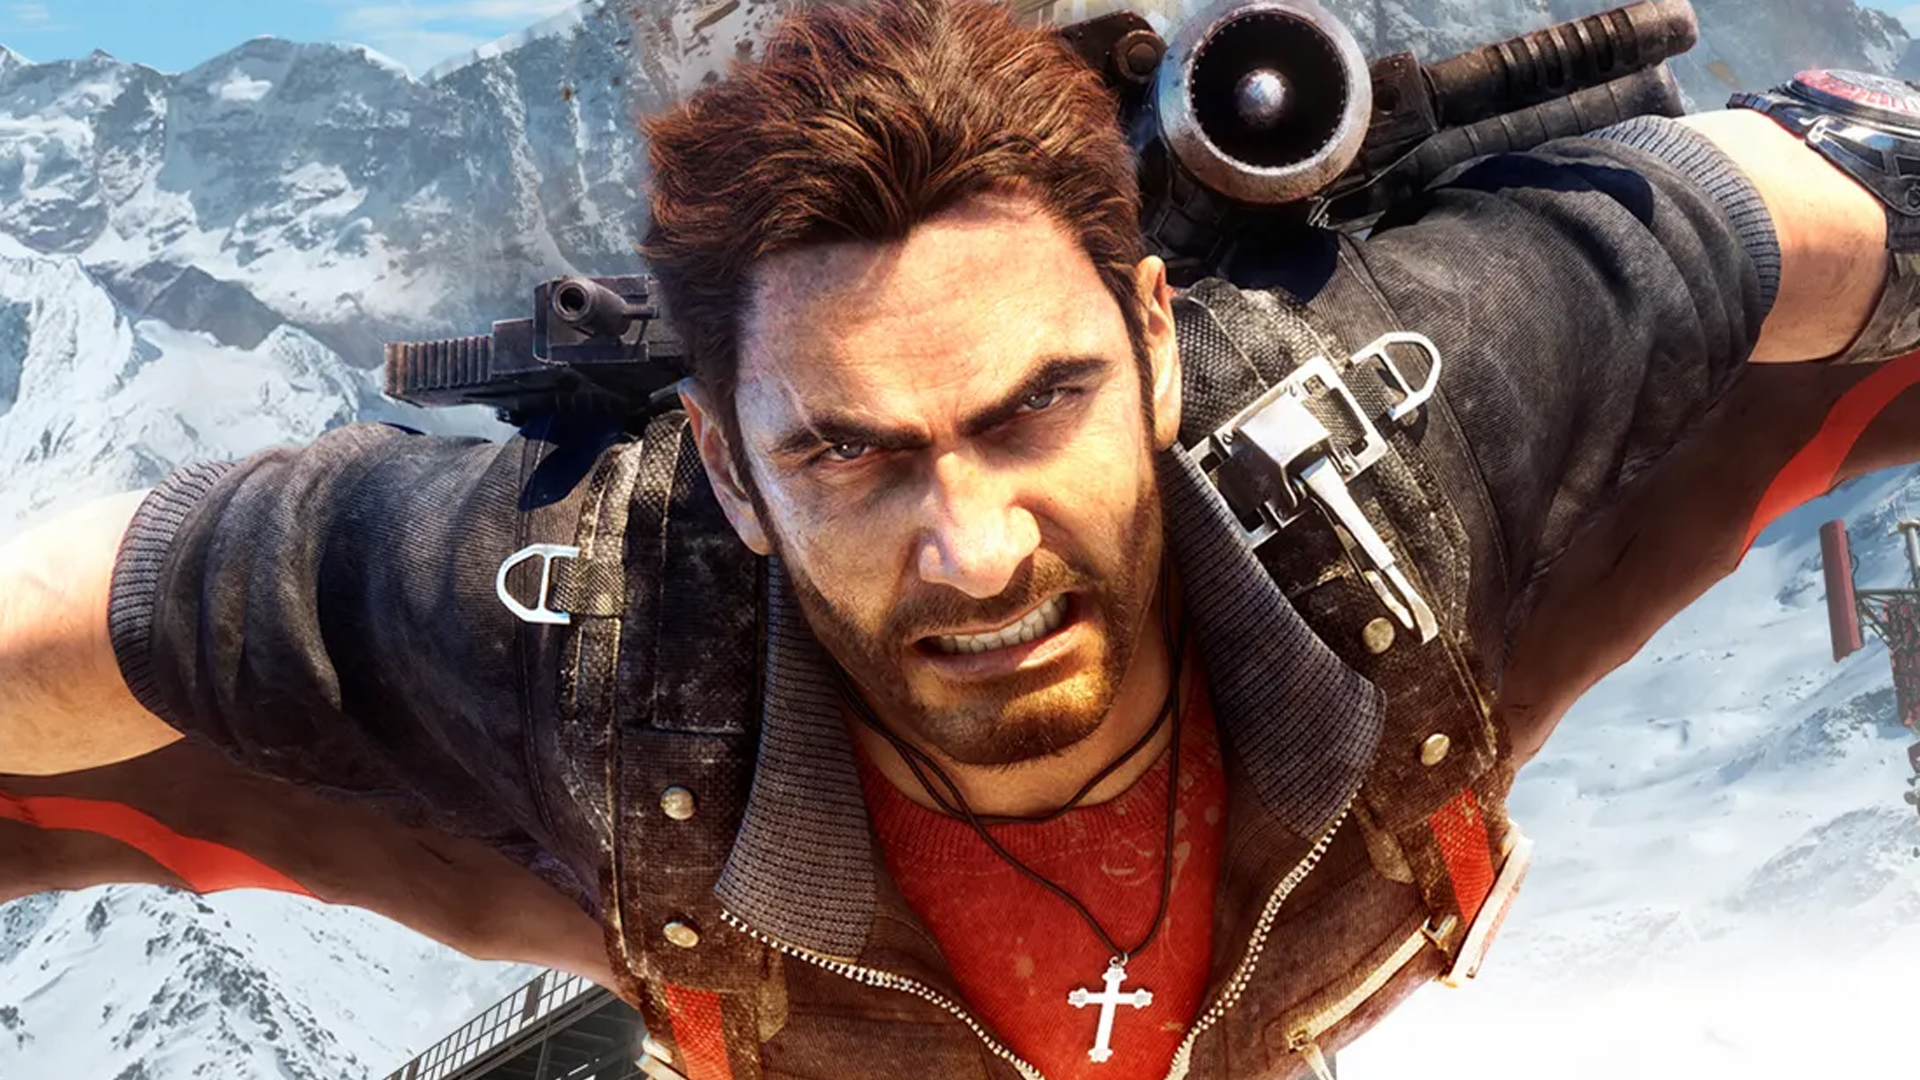 A new Just Cause open-world game is in development